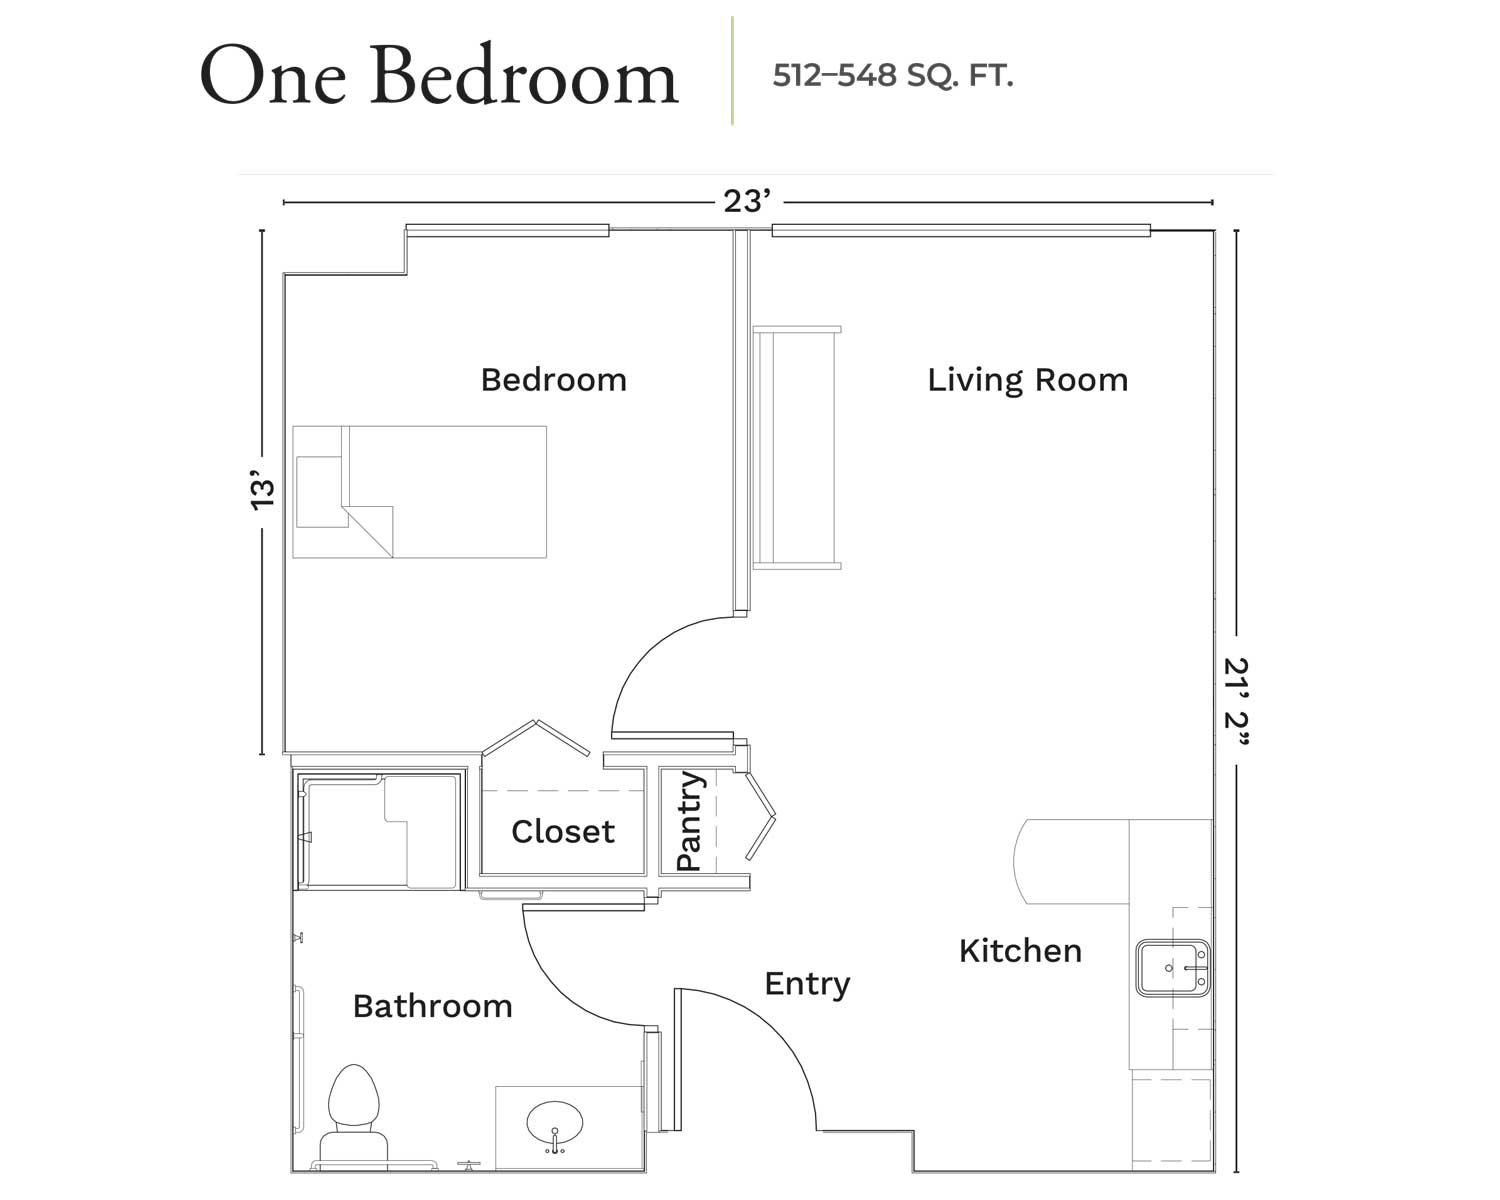 One-bedroom apartment floor plan with dimensions, featuring kitchen, bathroom, closet, and pantry.